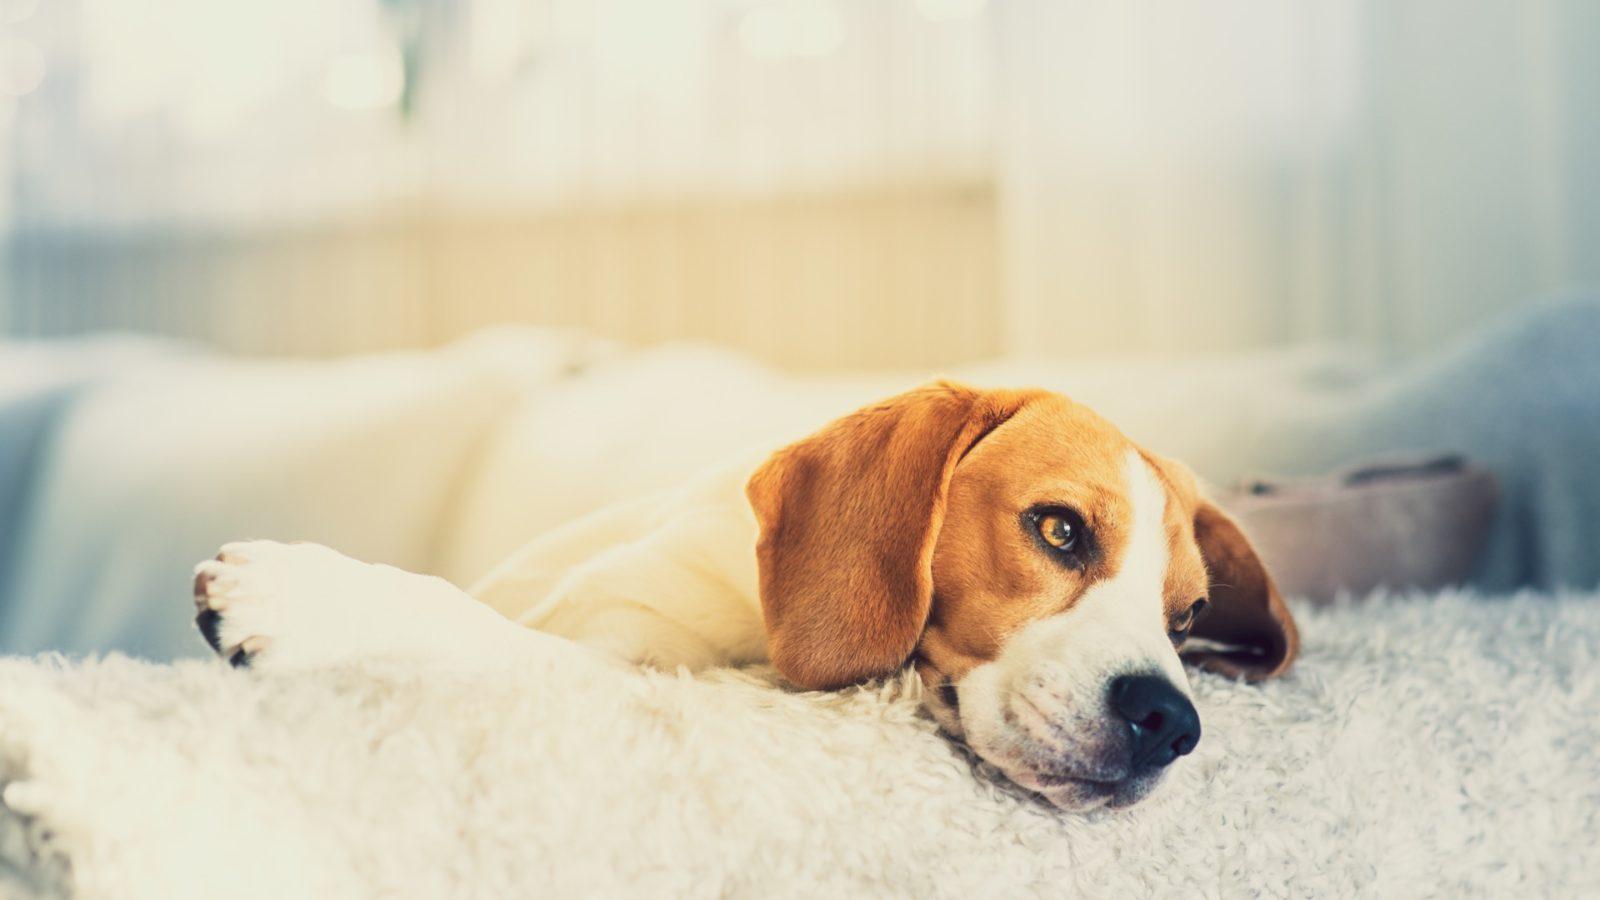 How do you know if your dog is having an anxiety attack?